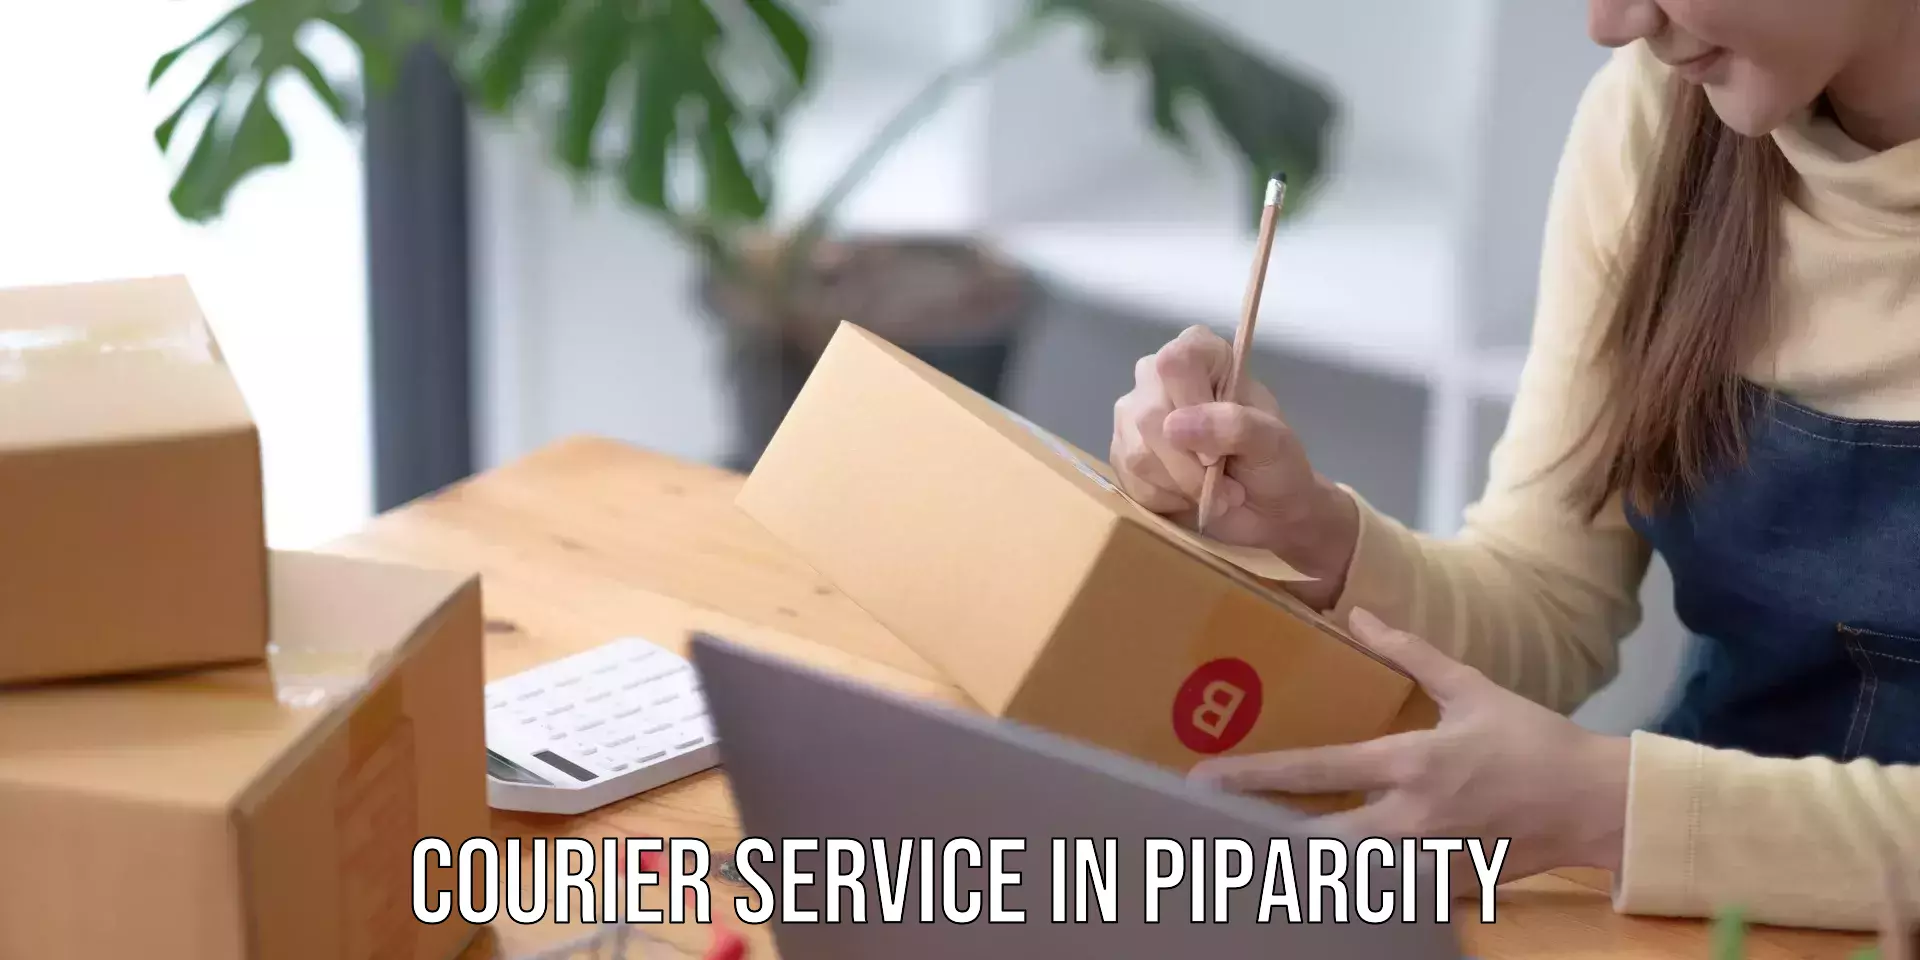 Logistics service provider in Piparcity